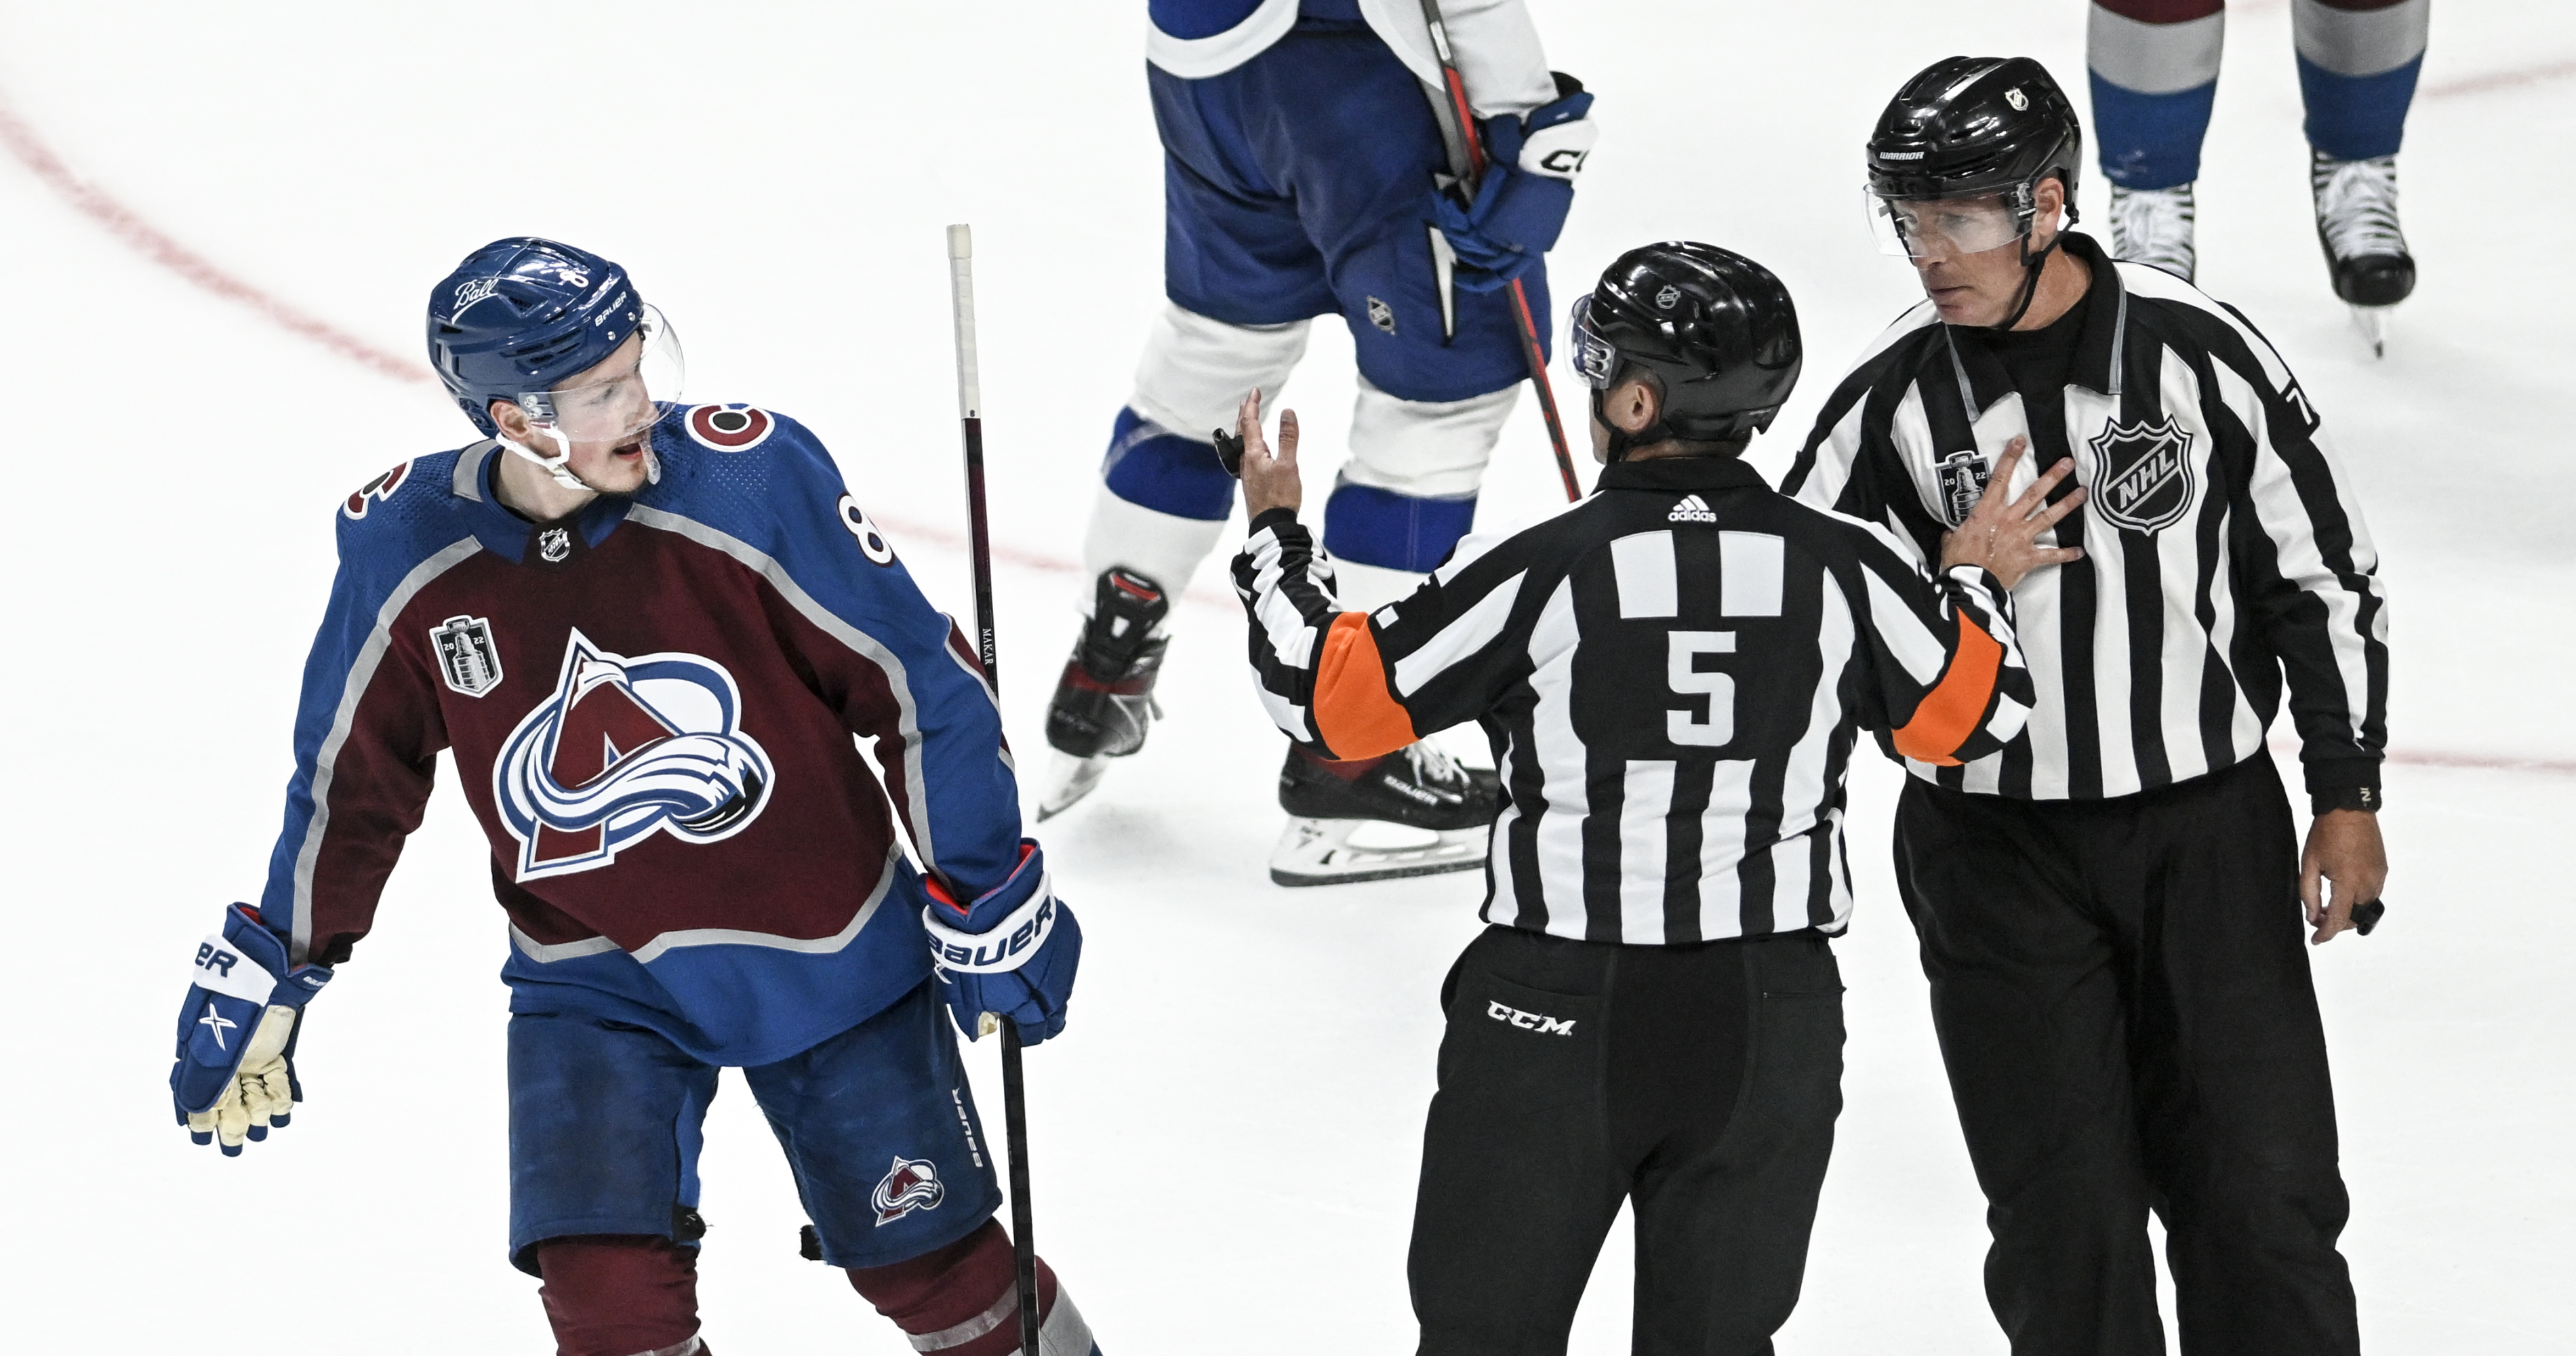 Too many men? NHL explains why disputed Avalanche OT goal counted